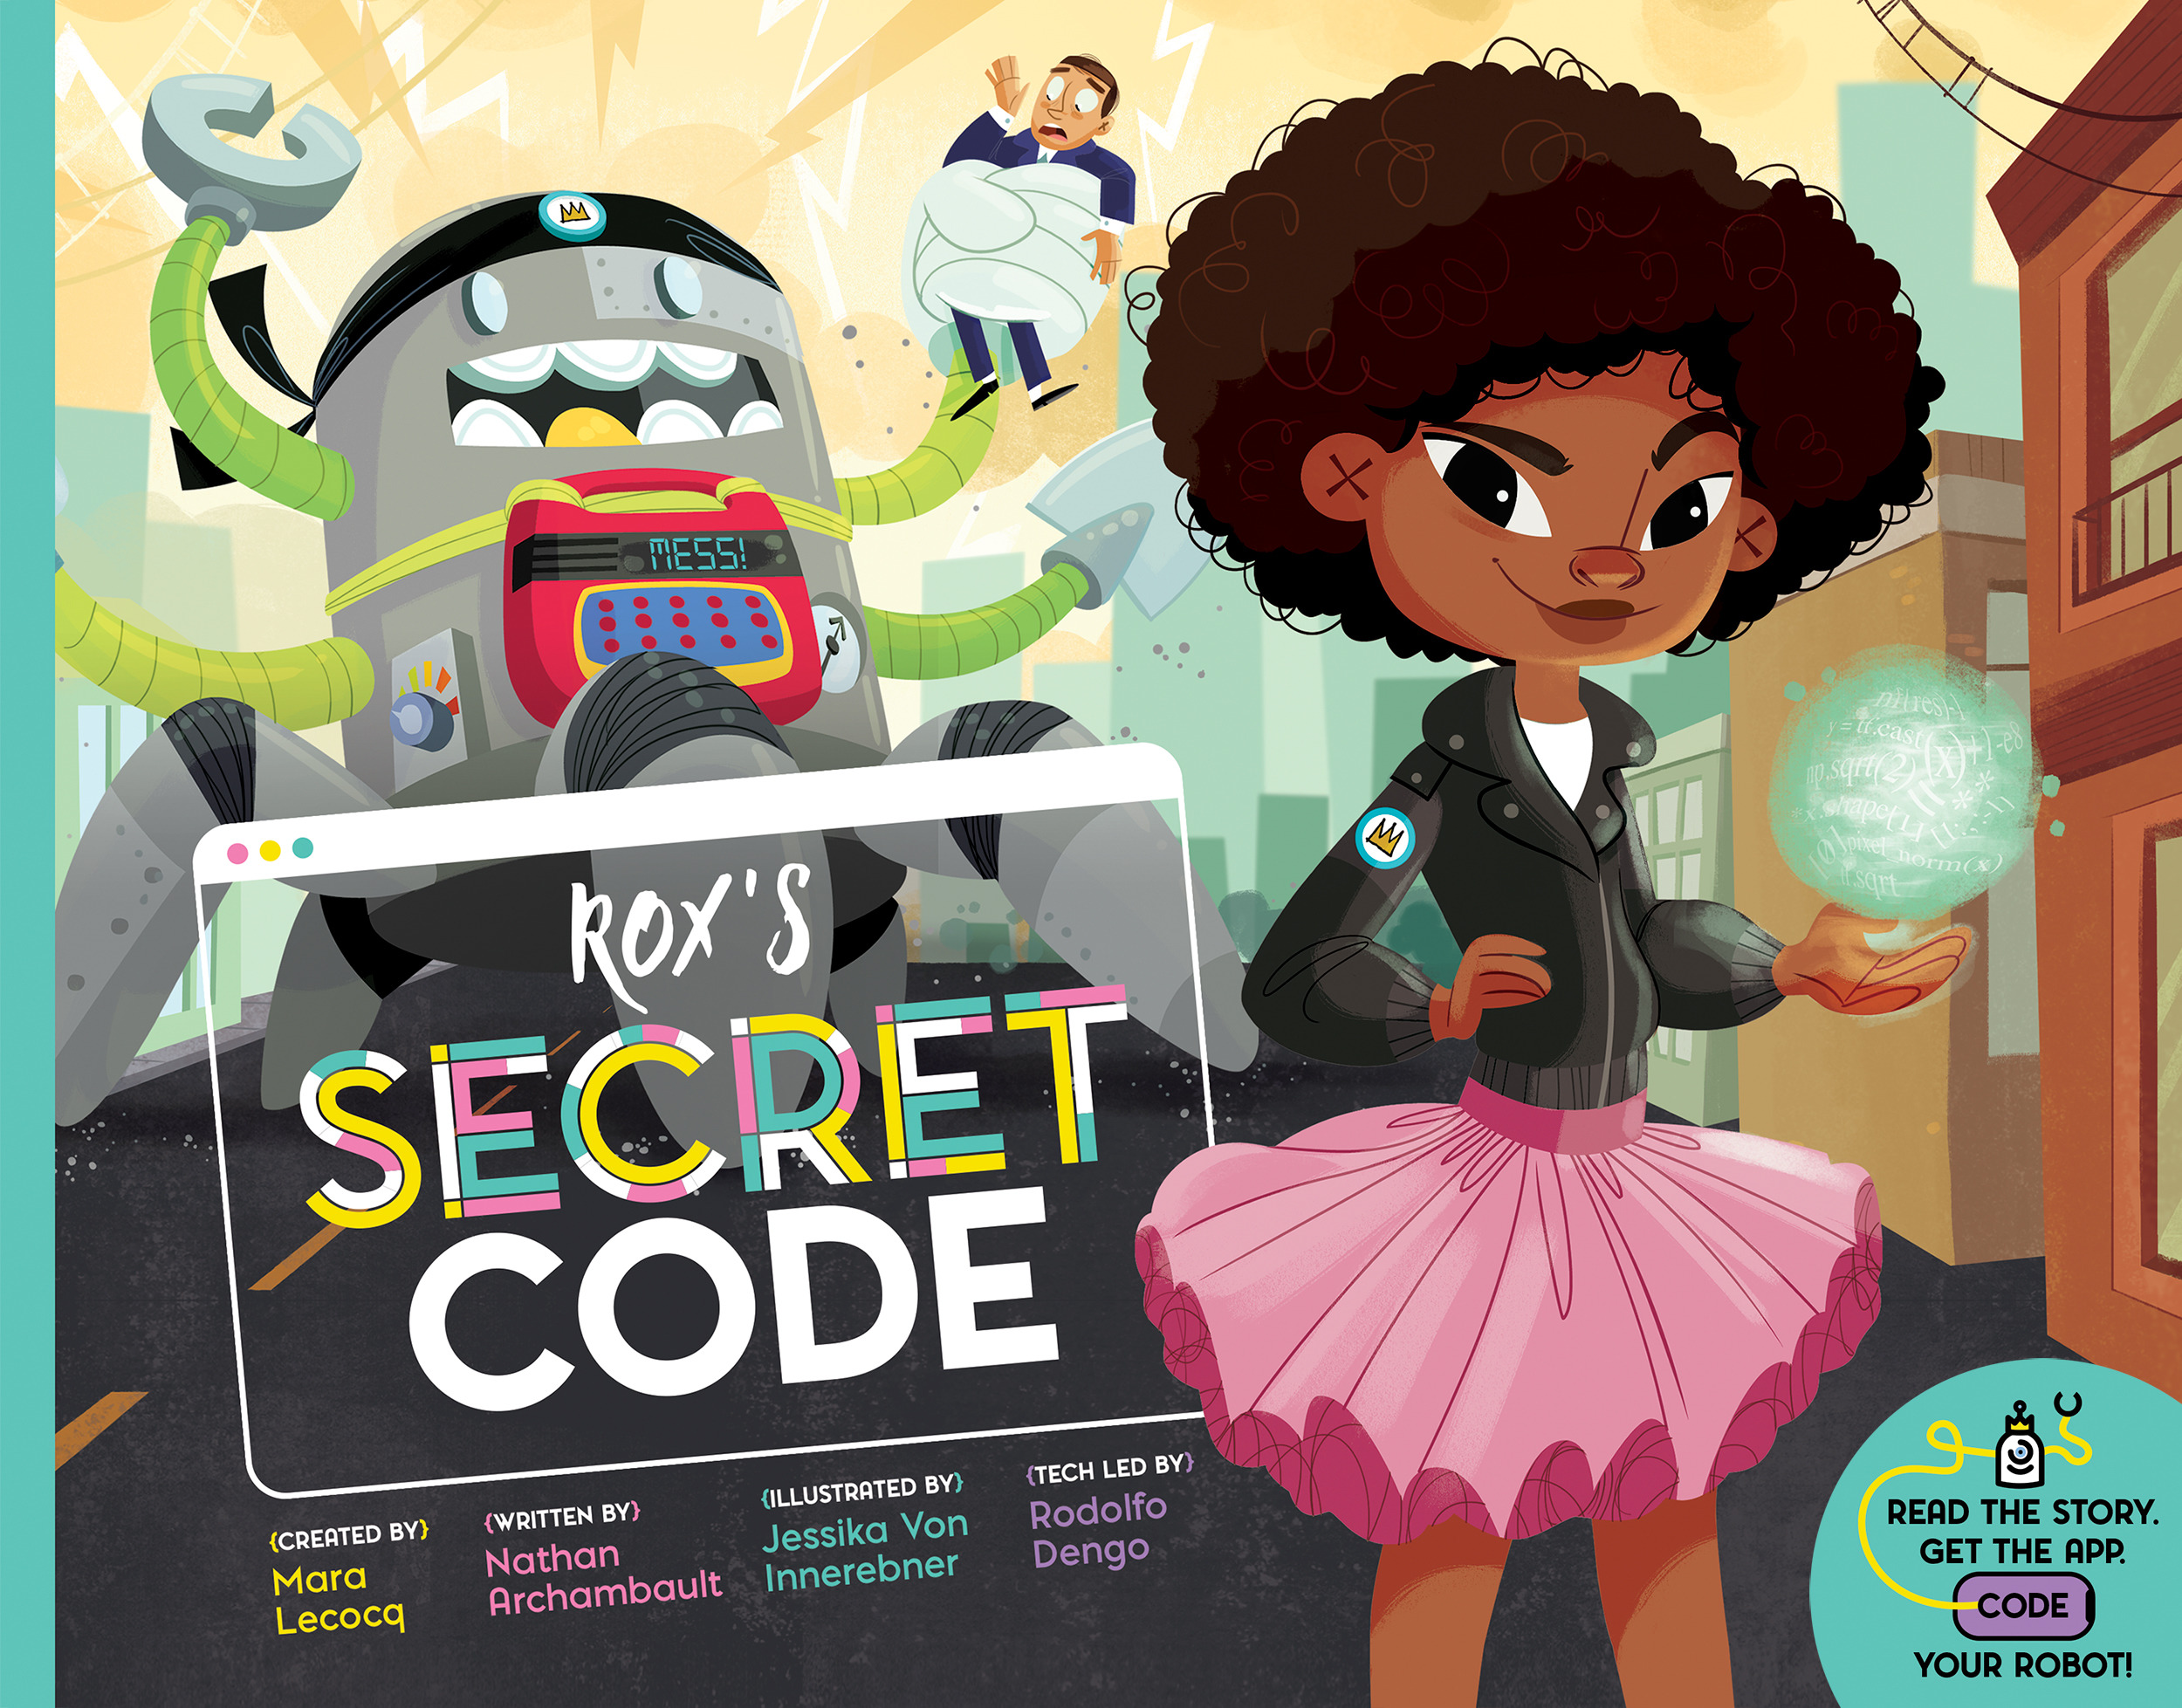 POW! Sunday Story Time with Mara Lecocq and Nathan Archambault (authors of Rox's Secret Code)